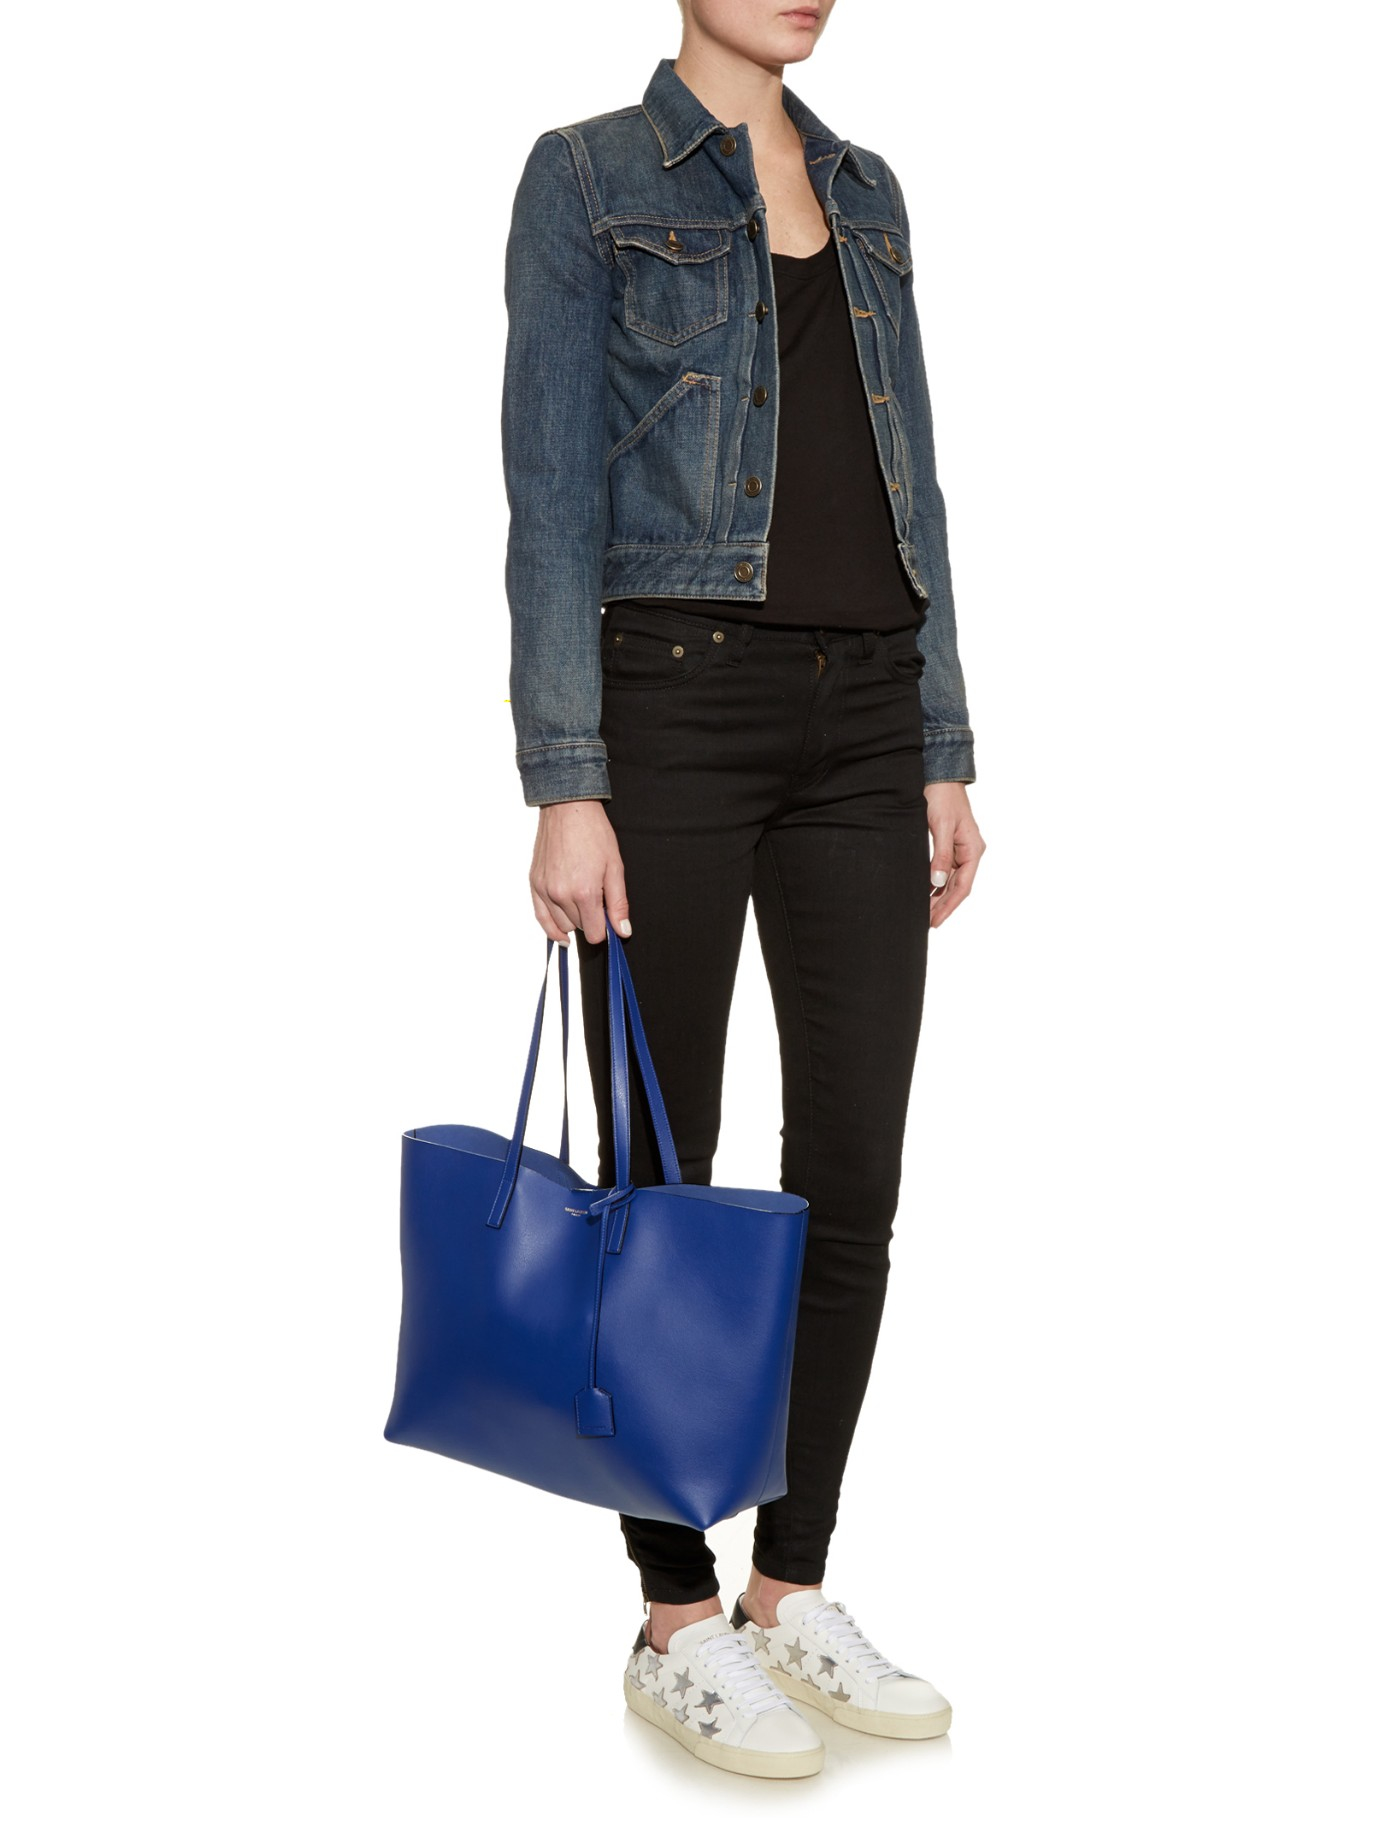 Lyst - Saint laurent Large Leather Shopping Bag in Blue